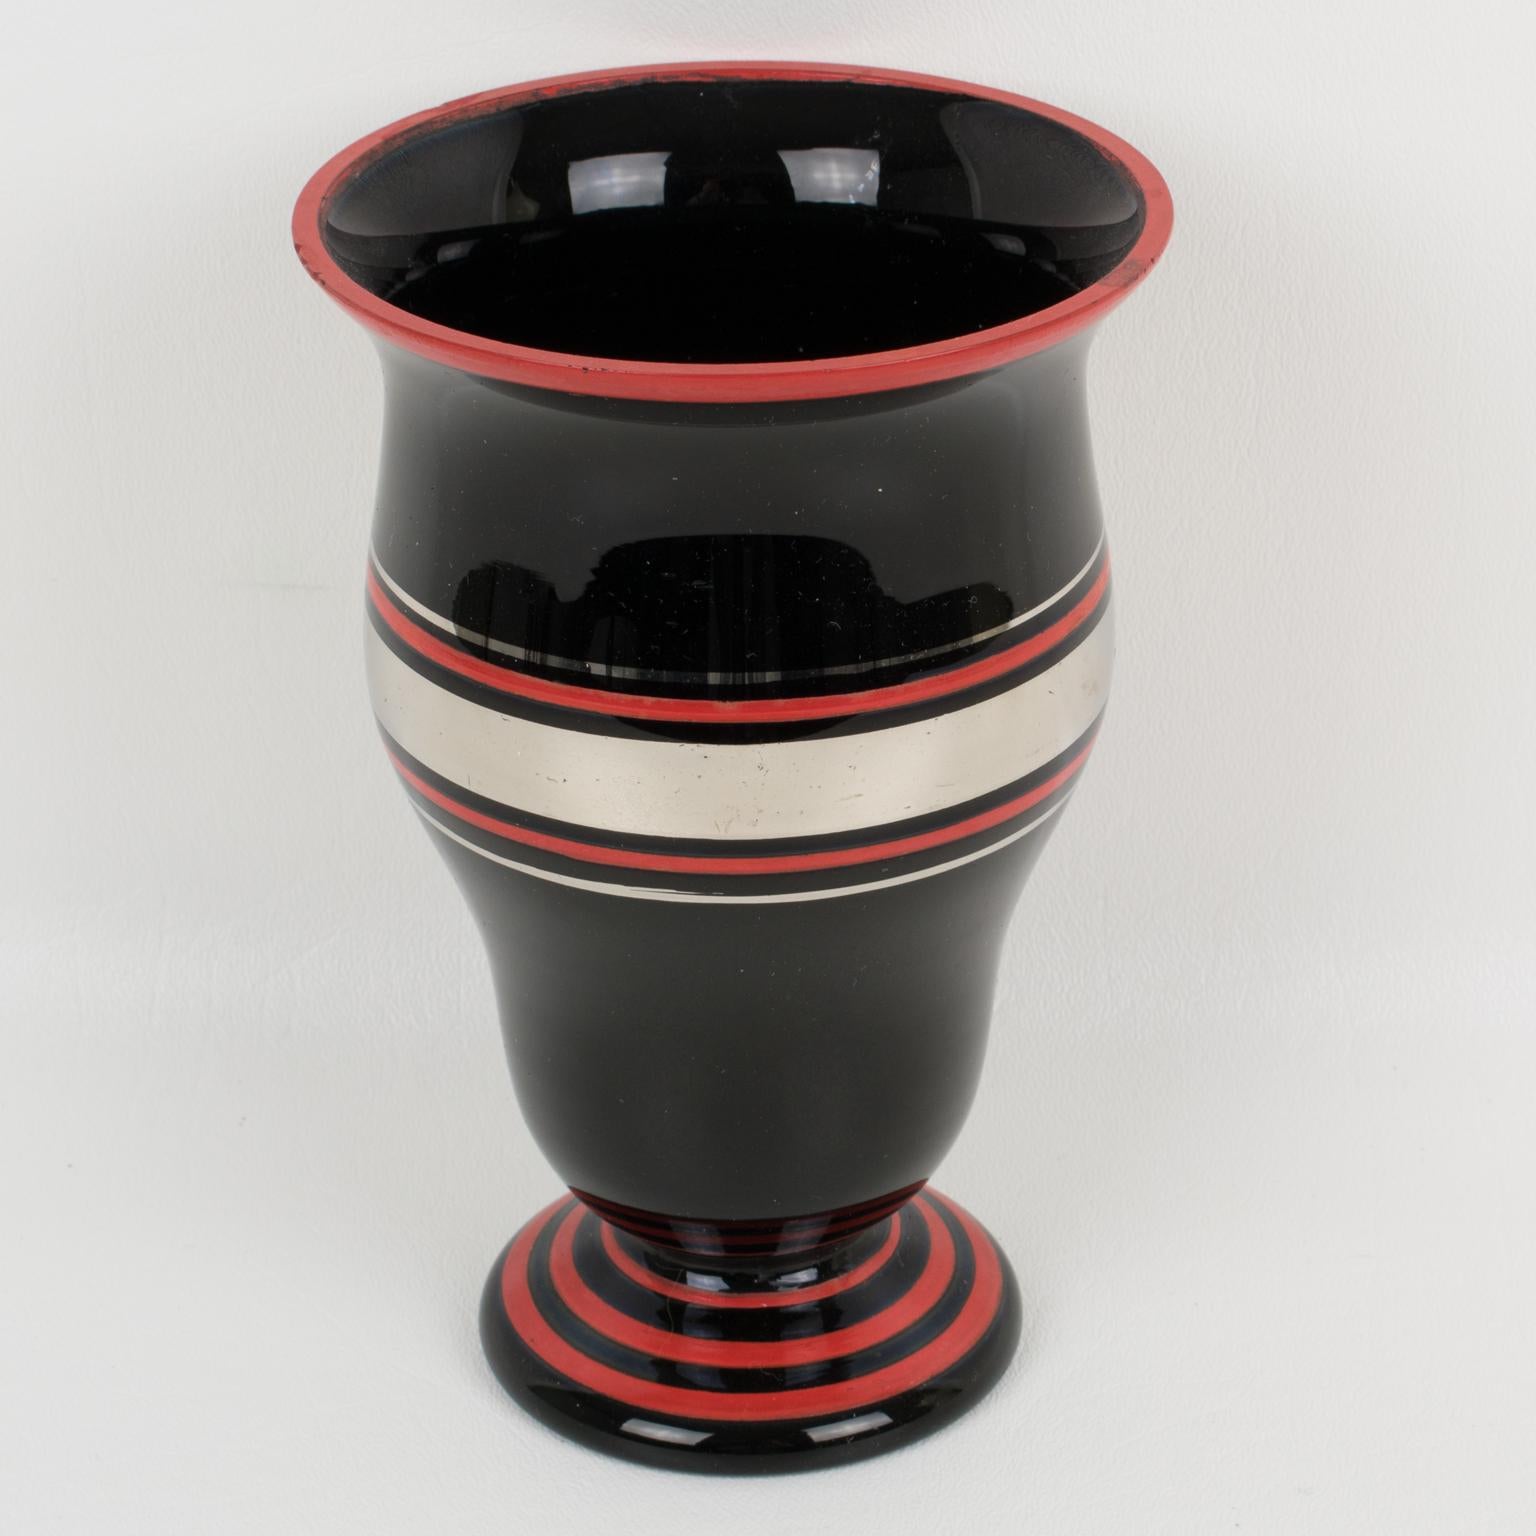 This lovely 1930s French Art Deco black glass vase features a silver and red deposit decoration around it with a geometric pattern. There is no visible maker's mark.
Fine original condition with some rubbing and age wear. A few flea bites on the top